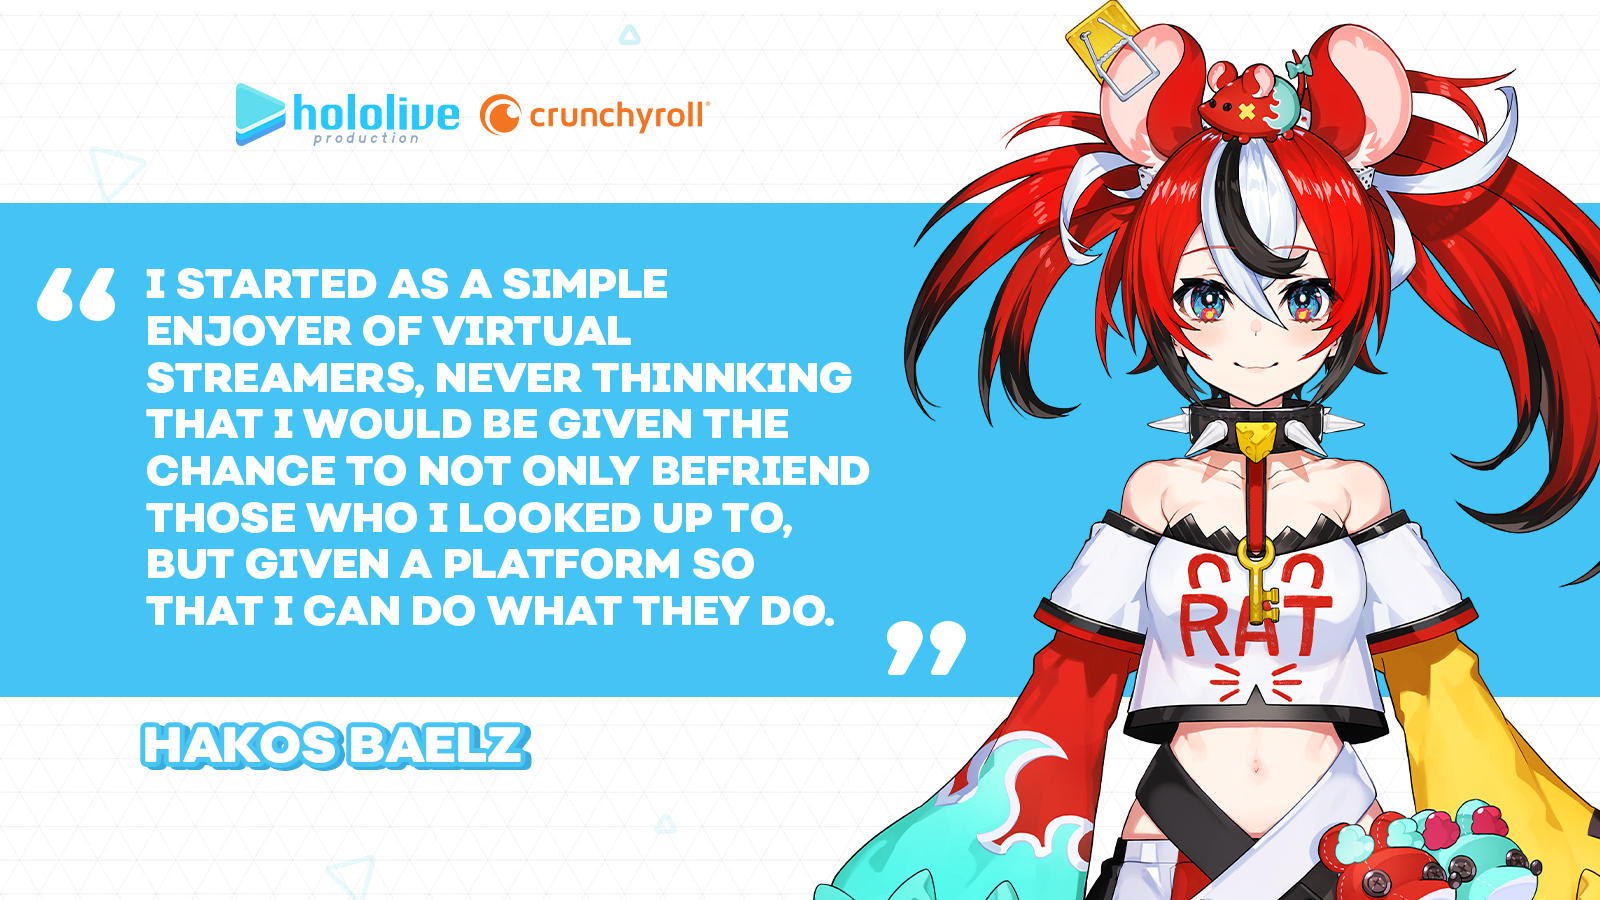 #INTERVIEW: Hakos Baelz Tells Us About Her Creative Process, Inuyasha Karaoke, And What Being A VTuber Means To Her